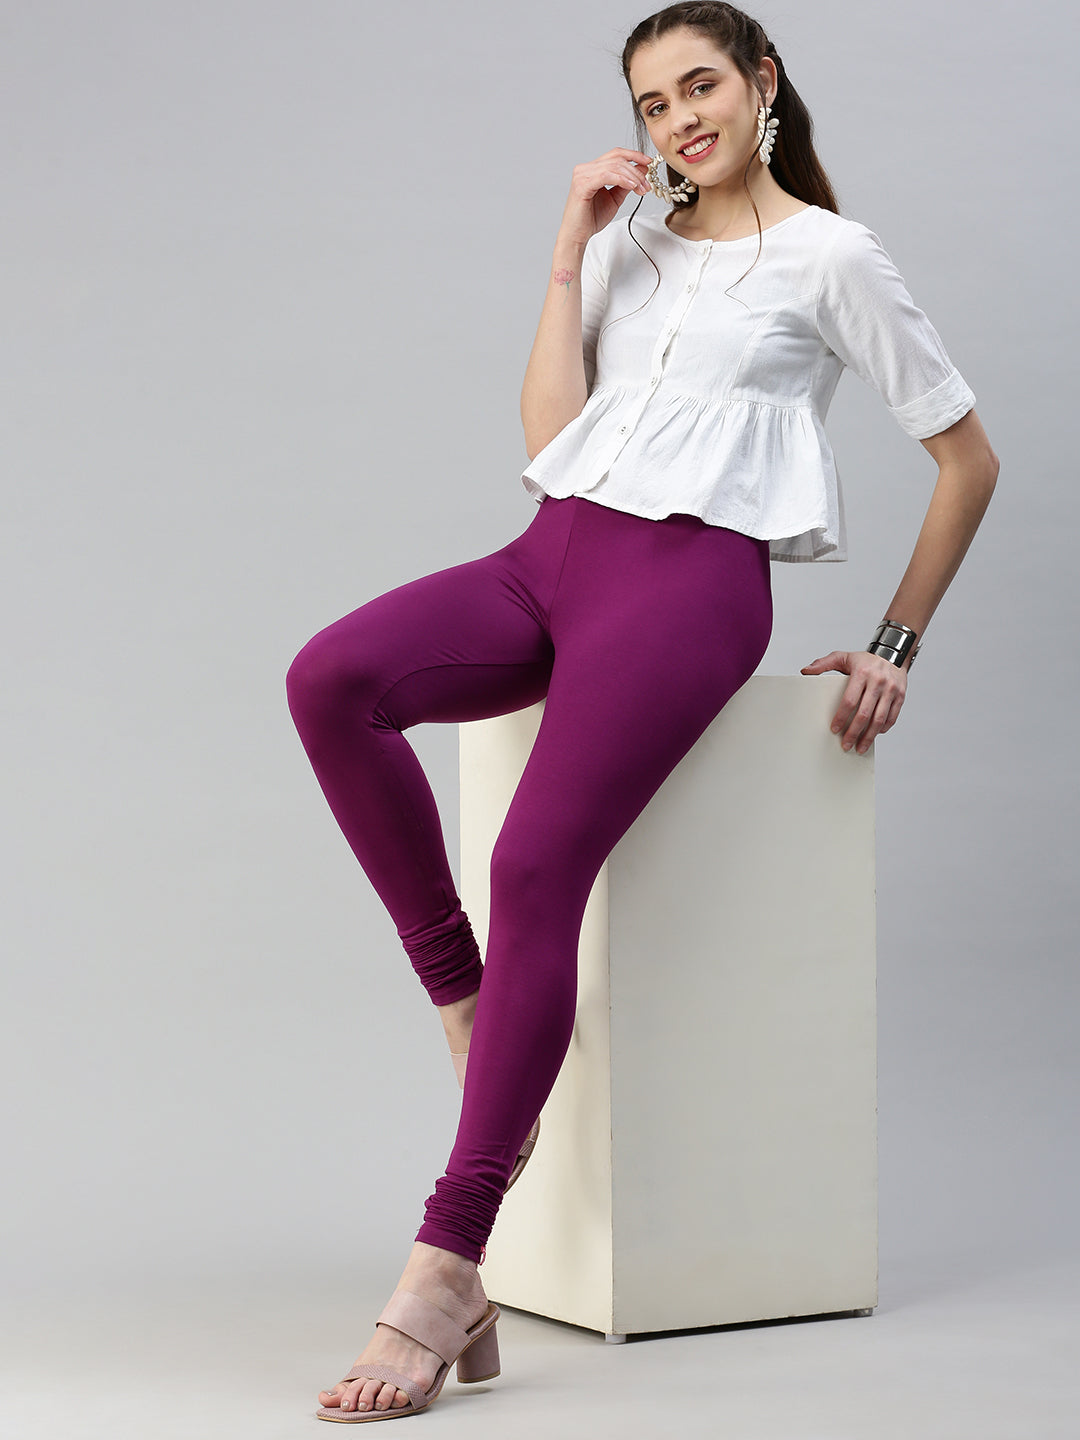 THE ANDAMANE GLADYS CRYSTAL SOLID COLOR LEGGINGS | Playground